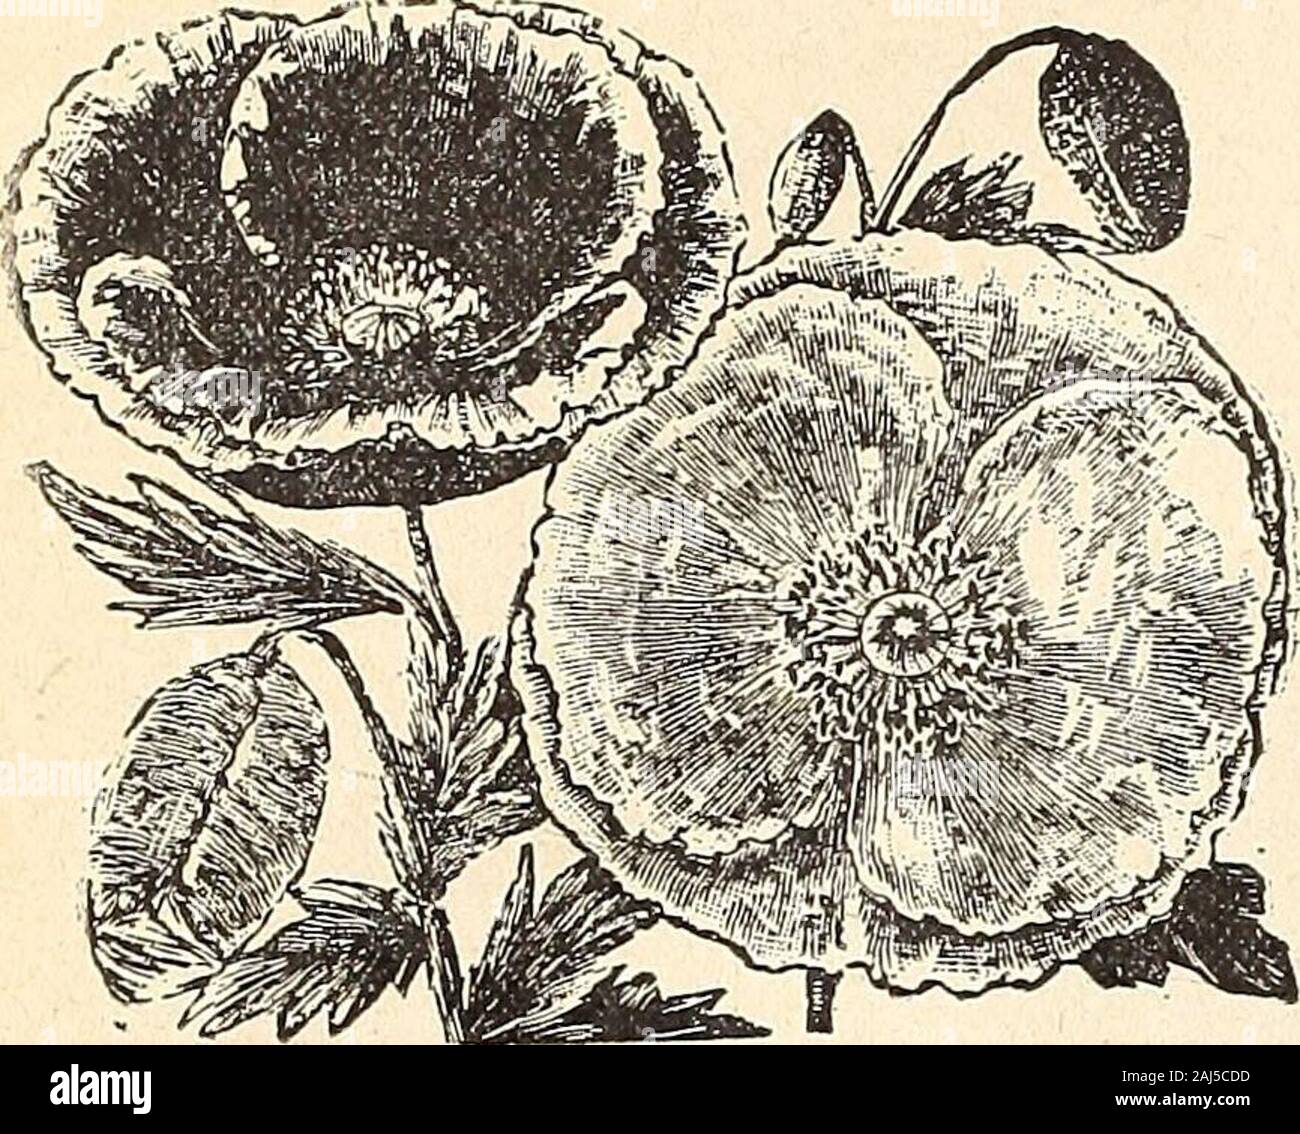 Horitucultural guide : spring 1892 . The large showyflowers of thisgenue make a brill-iant display in thegarden. SINGLE ANNUAL VARIETIES. D a n e b r o g—• Brilliant scarletwith a cross ofwhite in center,resembling theDanish Banner. 5iilnglish Scarlet—The brightscarlet ilowersNEW suisLKr POPPIES. of this variety are very effective, 3 feet 5 ^mbrosum—Rich vermilion, with black spot on each petal 5 Peacock Poppy—Large brilliant scarlet and crimson flowers with a blackzone near the center, making a strong and beautiful contrast. Flowers about 4 inches in diameter 10 liSevlgatum (Fire Dragoo)—A ne Stock Photo